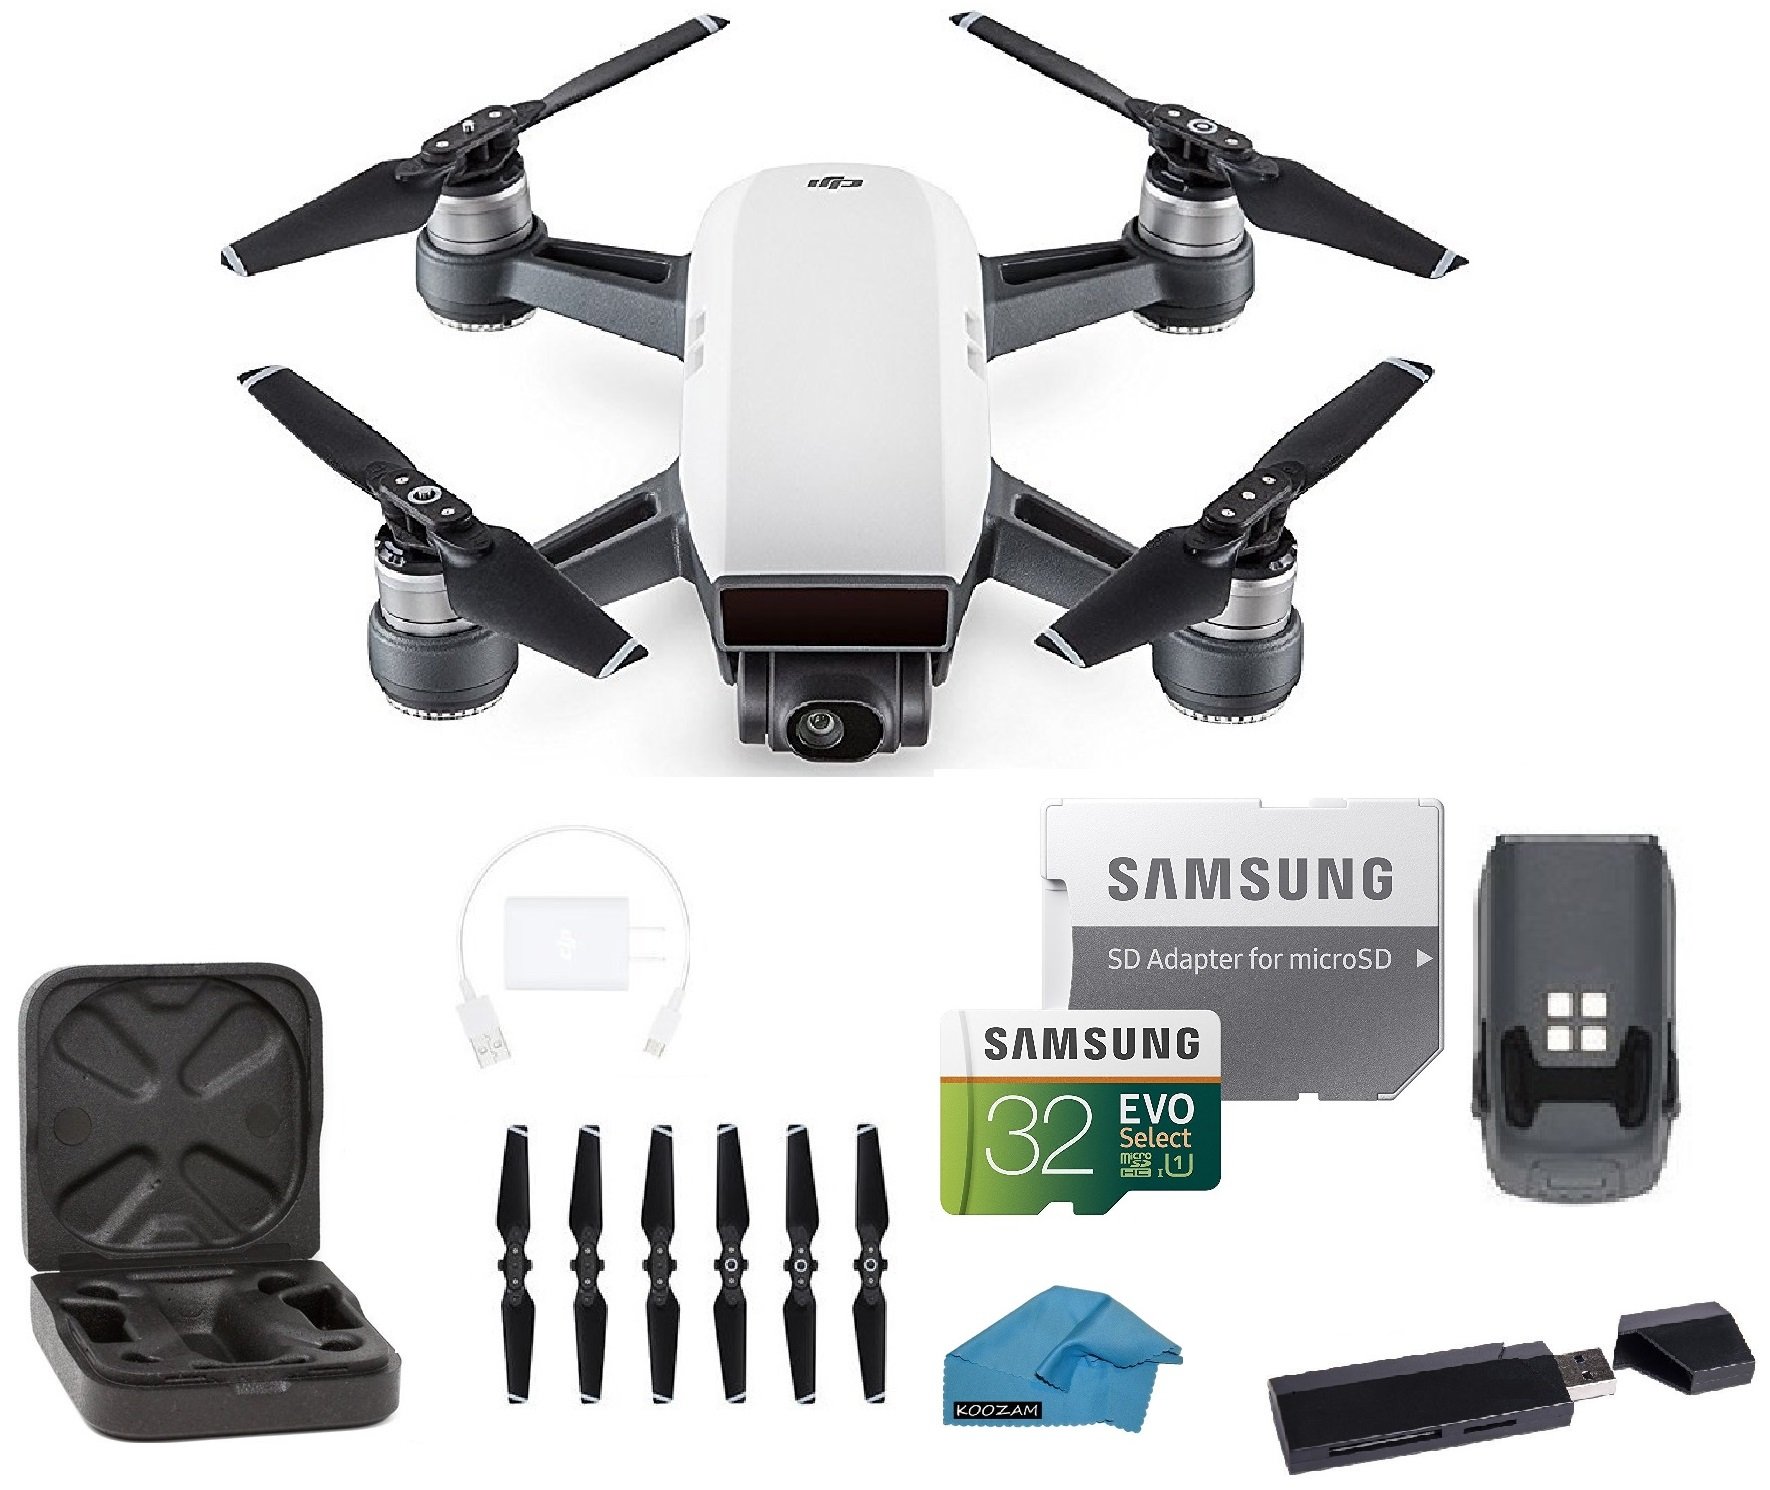 DJI Spark Intelligent Portable Mini Drone Quadcopter, with MUST HAVE BUNDLE, 32 GB SD Card, Reader and Koozam Cleaning Cloth (Alpine White)